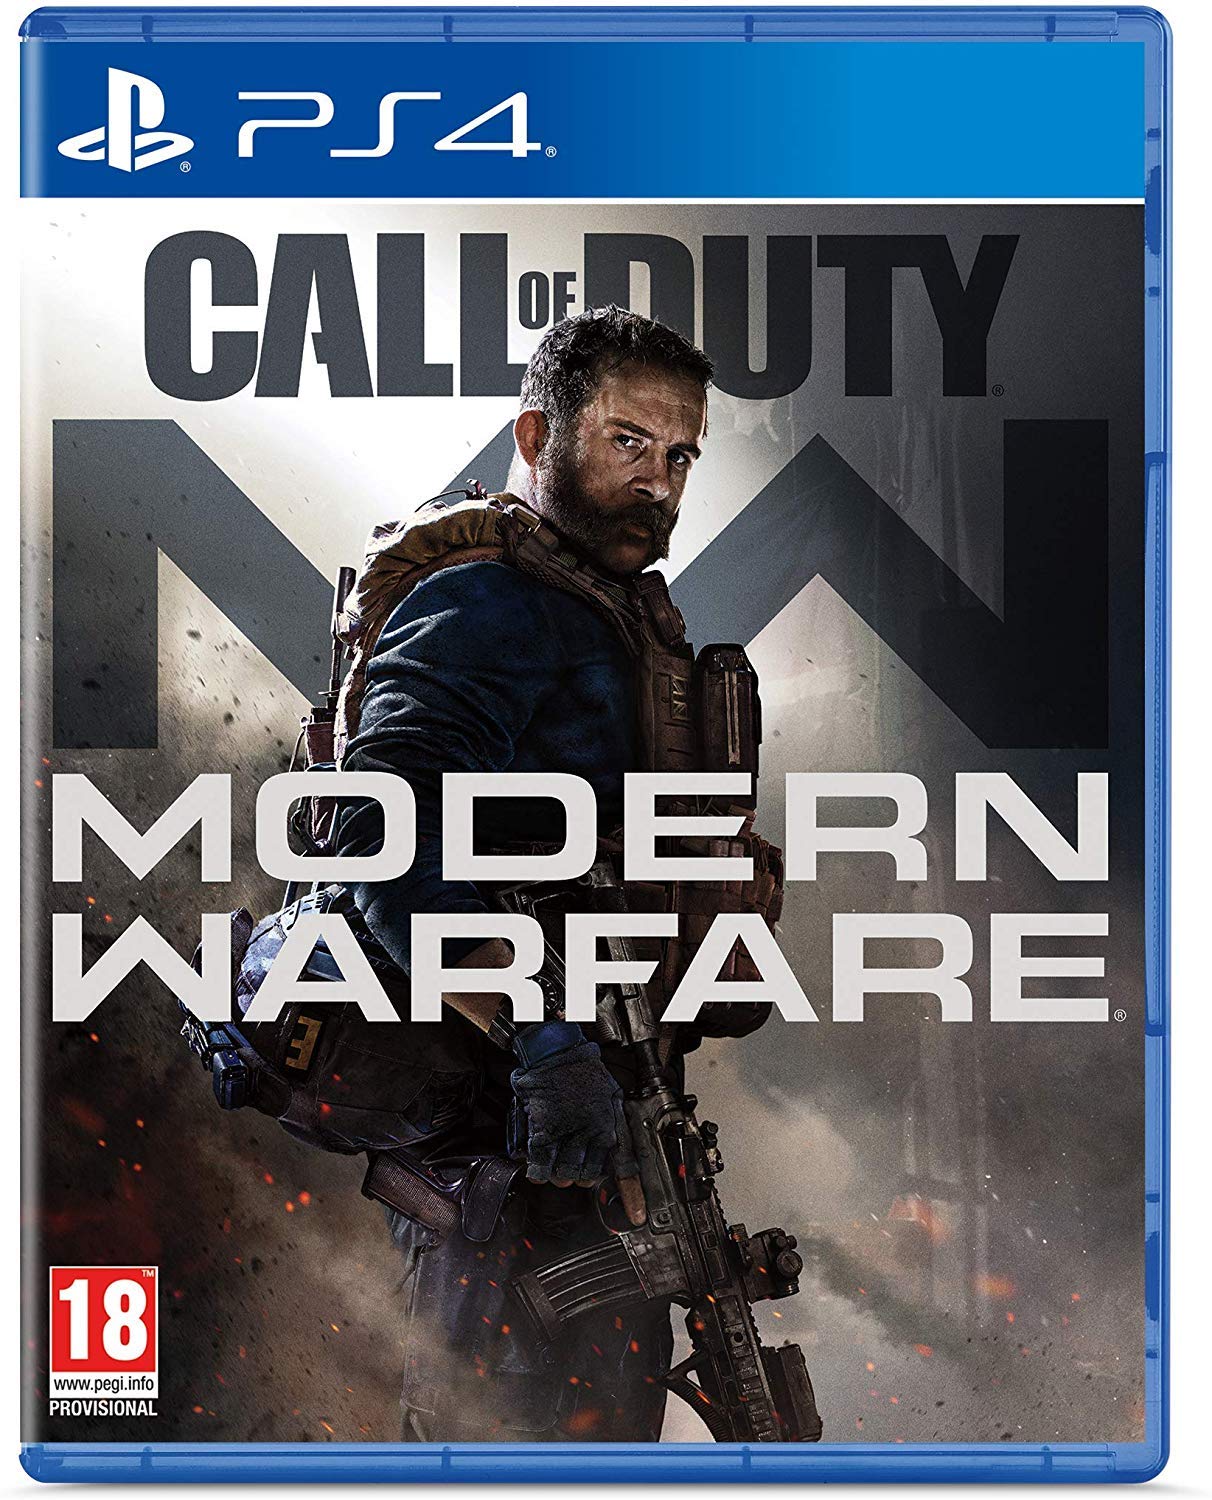 Call of Duty Modern Warfare (PS4) - كول اوف ديوتي مودرن وورفير